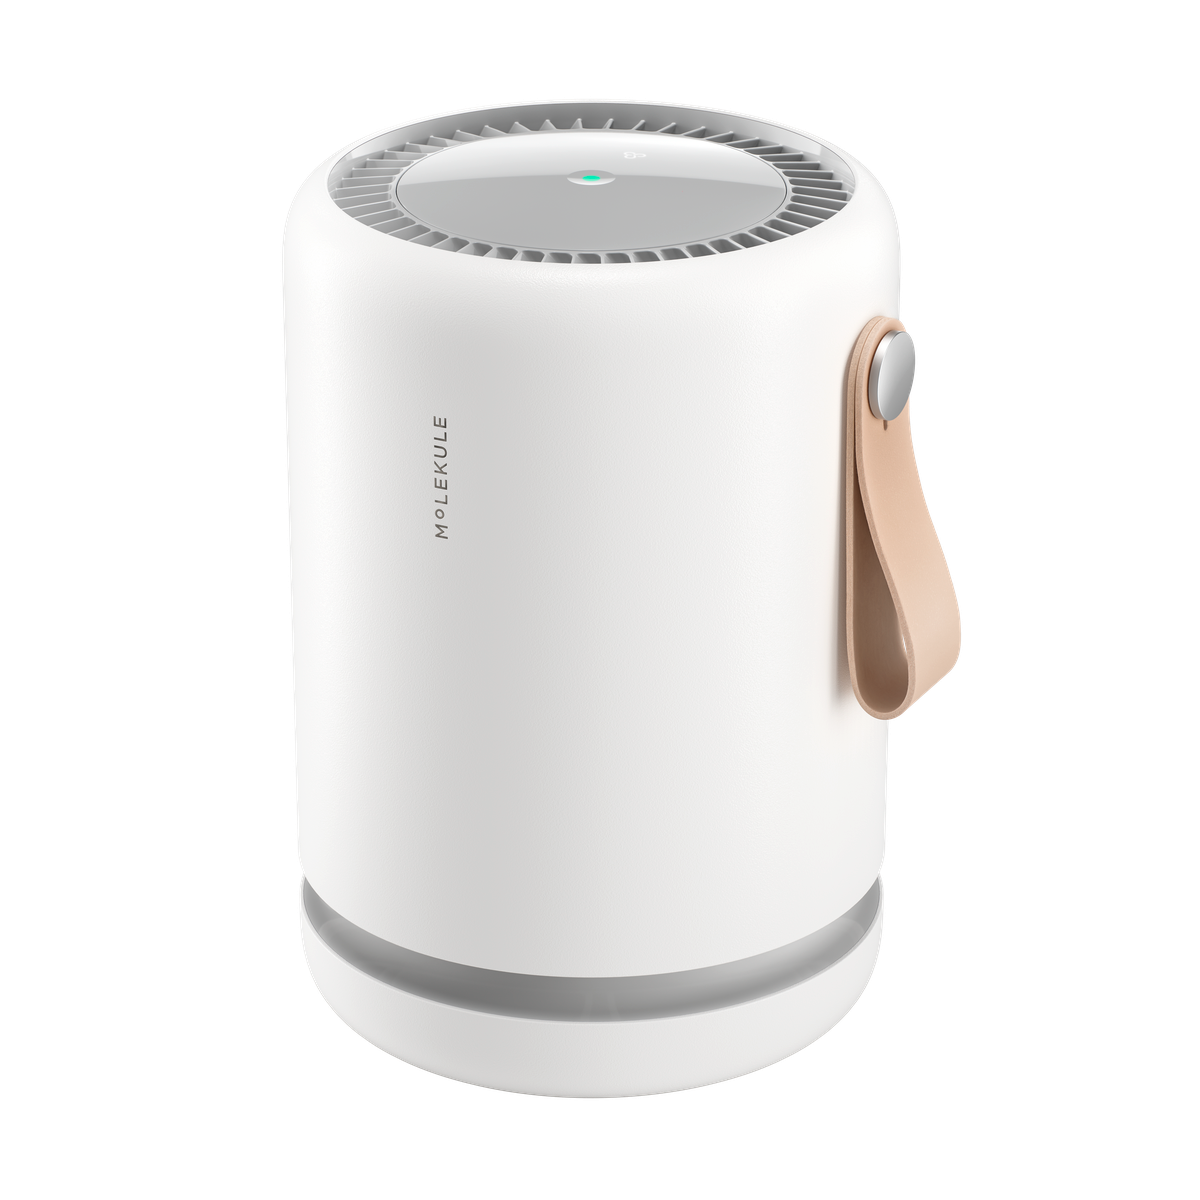 Molekule's Air Purification Will Soon Be Available in the UK and Across Europe